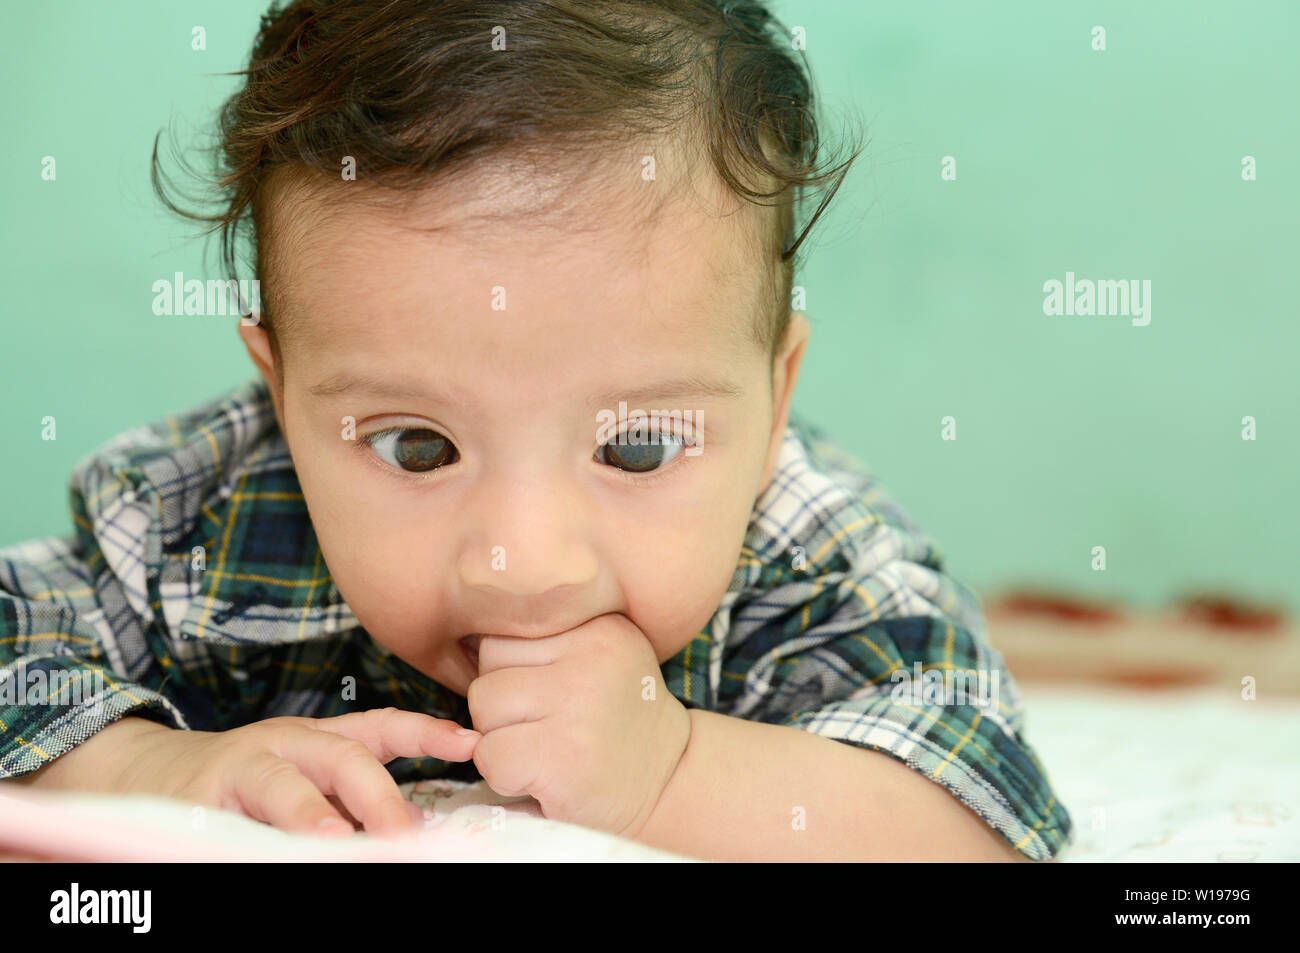 A Cute Indian Innocent New Born Baby in a Jovial Mood with a Charming Smile  Stock Image - Image of beauty, healthy: 190541739